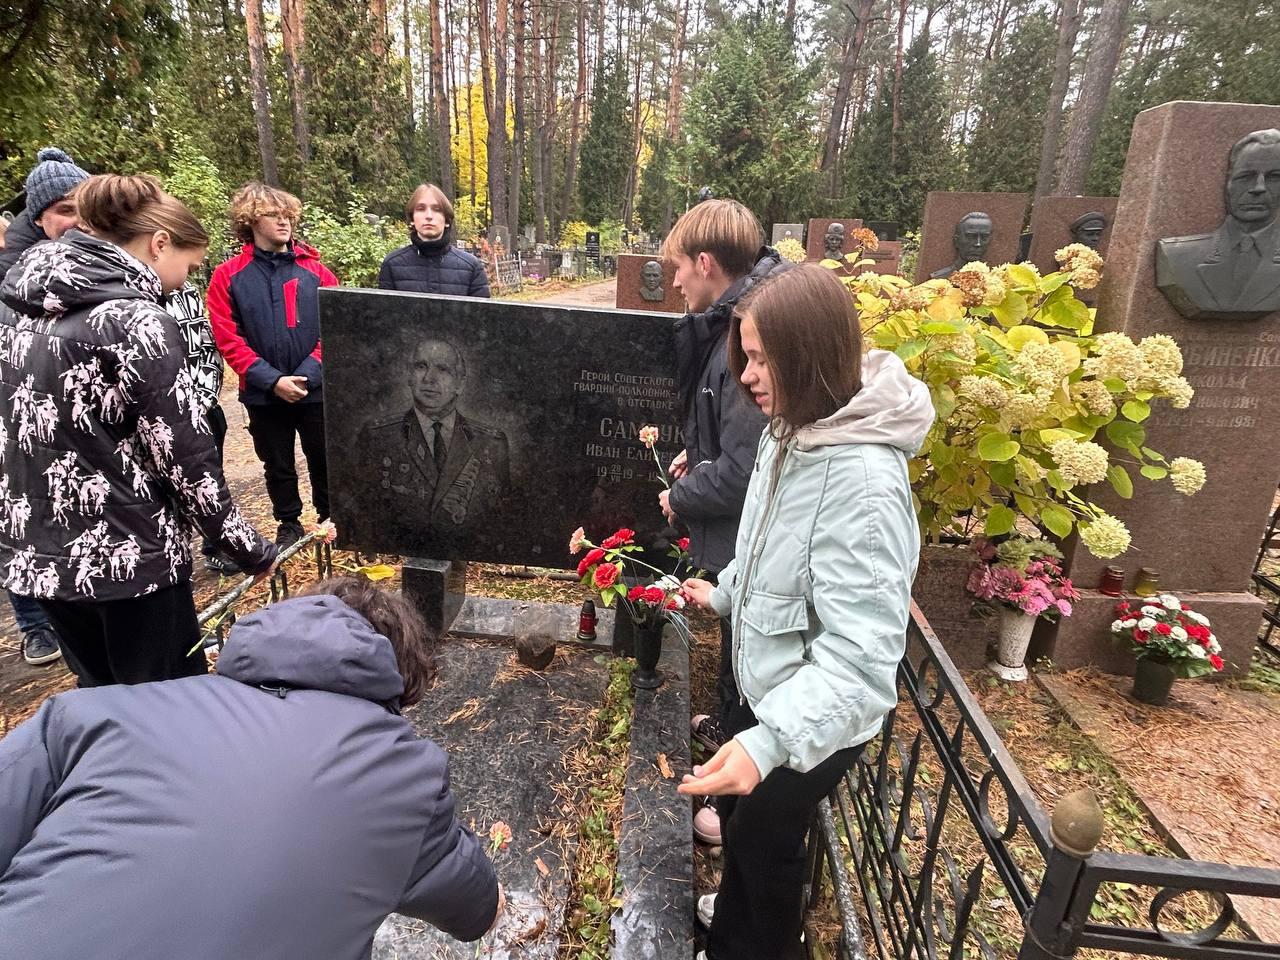 Laying flowers on the grave of Ivan Eliseevich Sambuka at the Vostochnoe cemetery